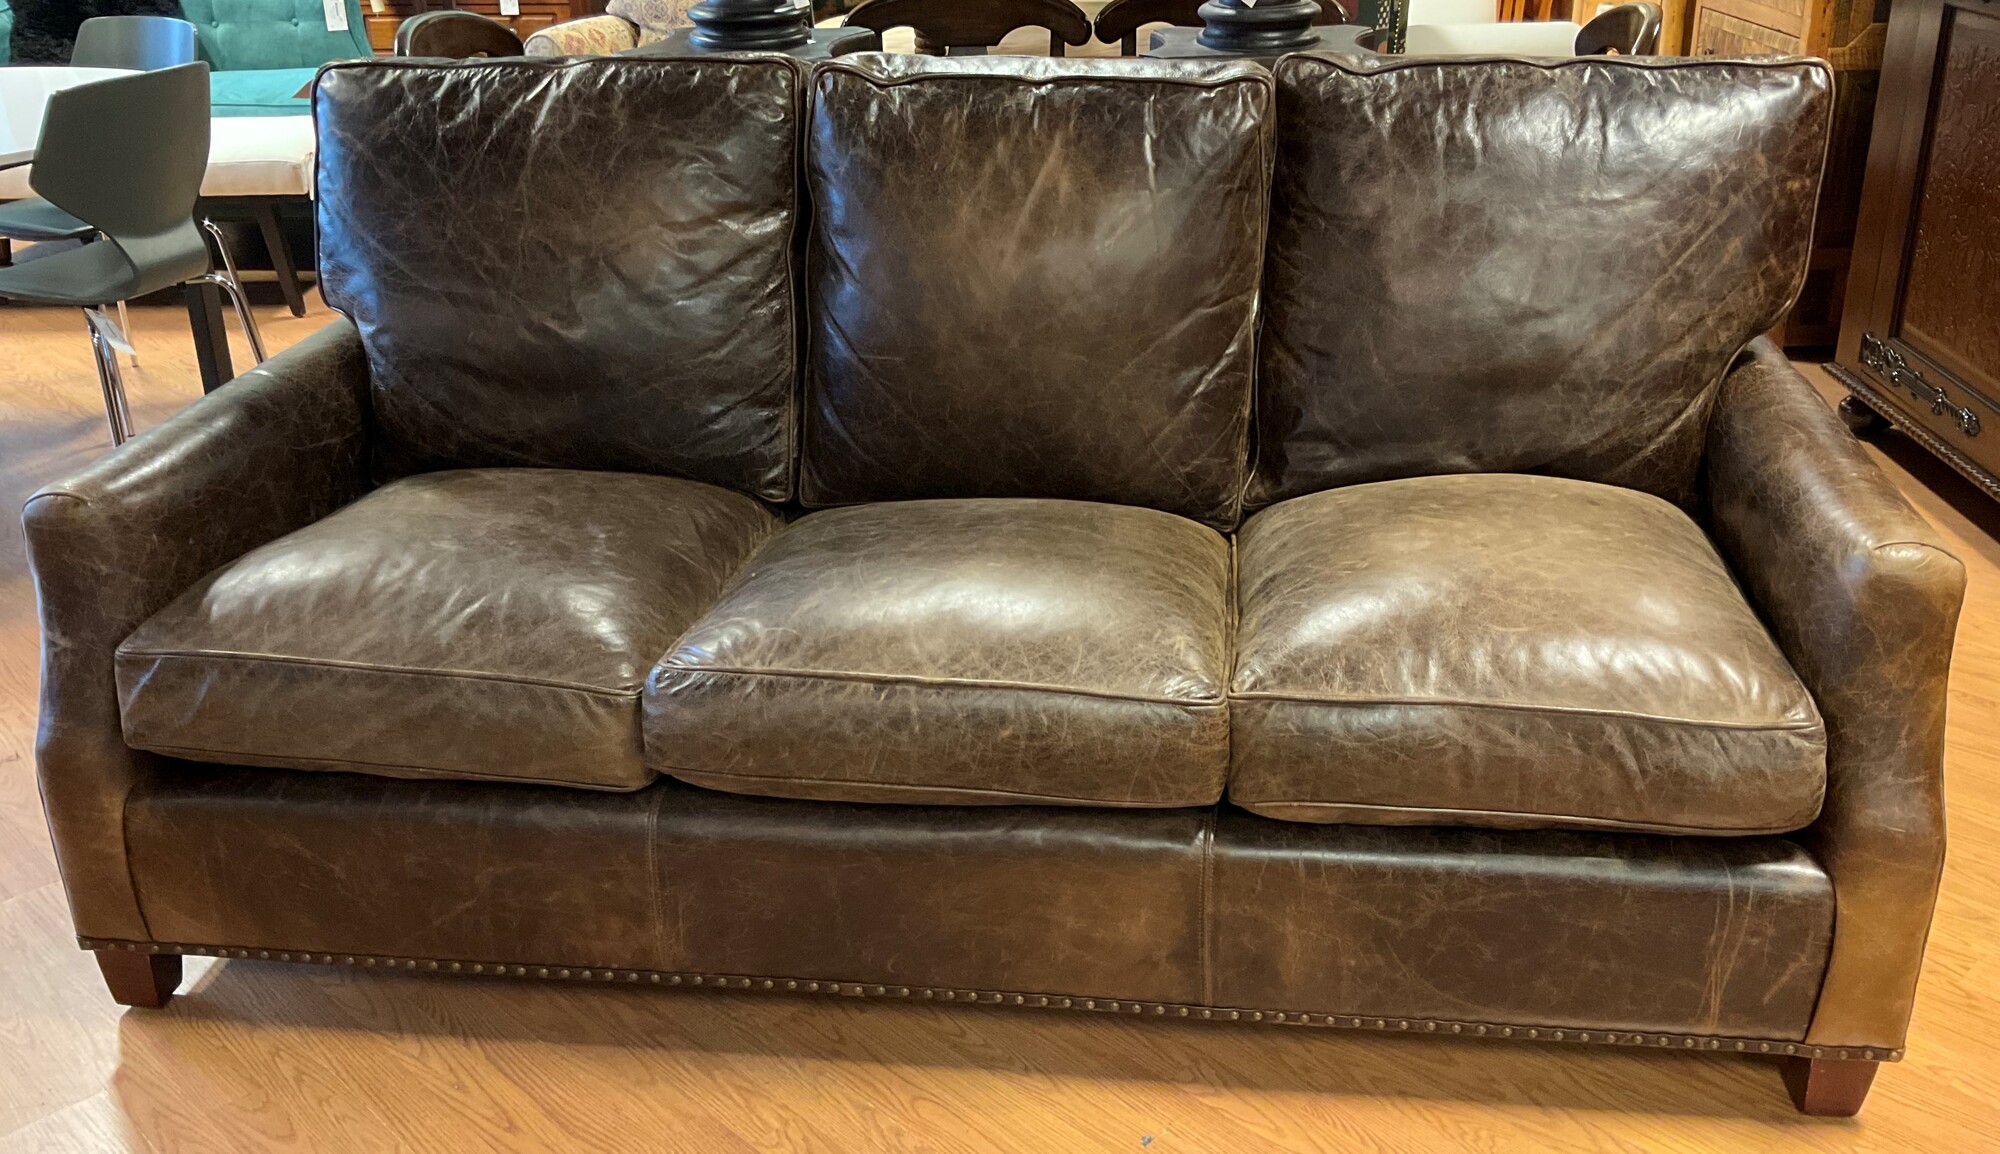 Leather Studded Sofa
Dark Brown
37in(H) 37in(D) 81in(W)